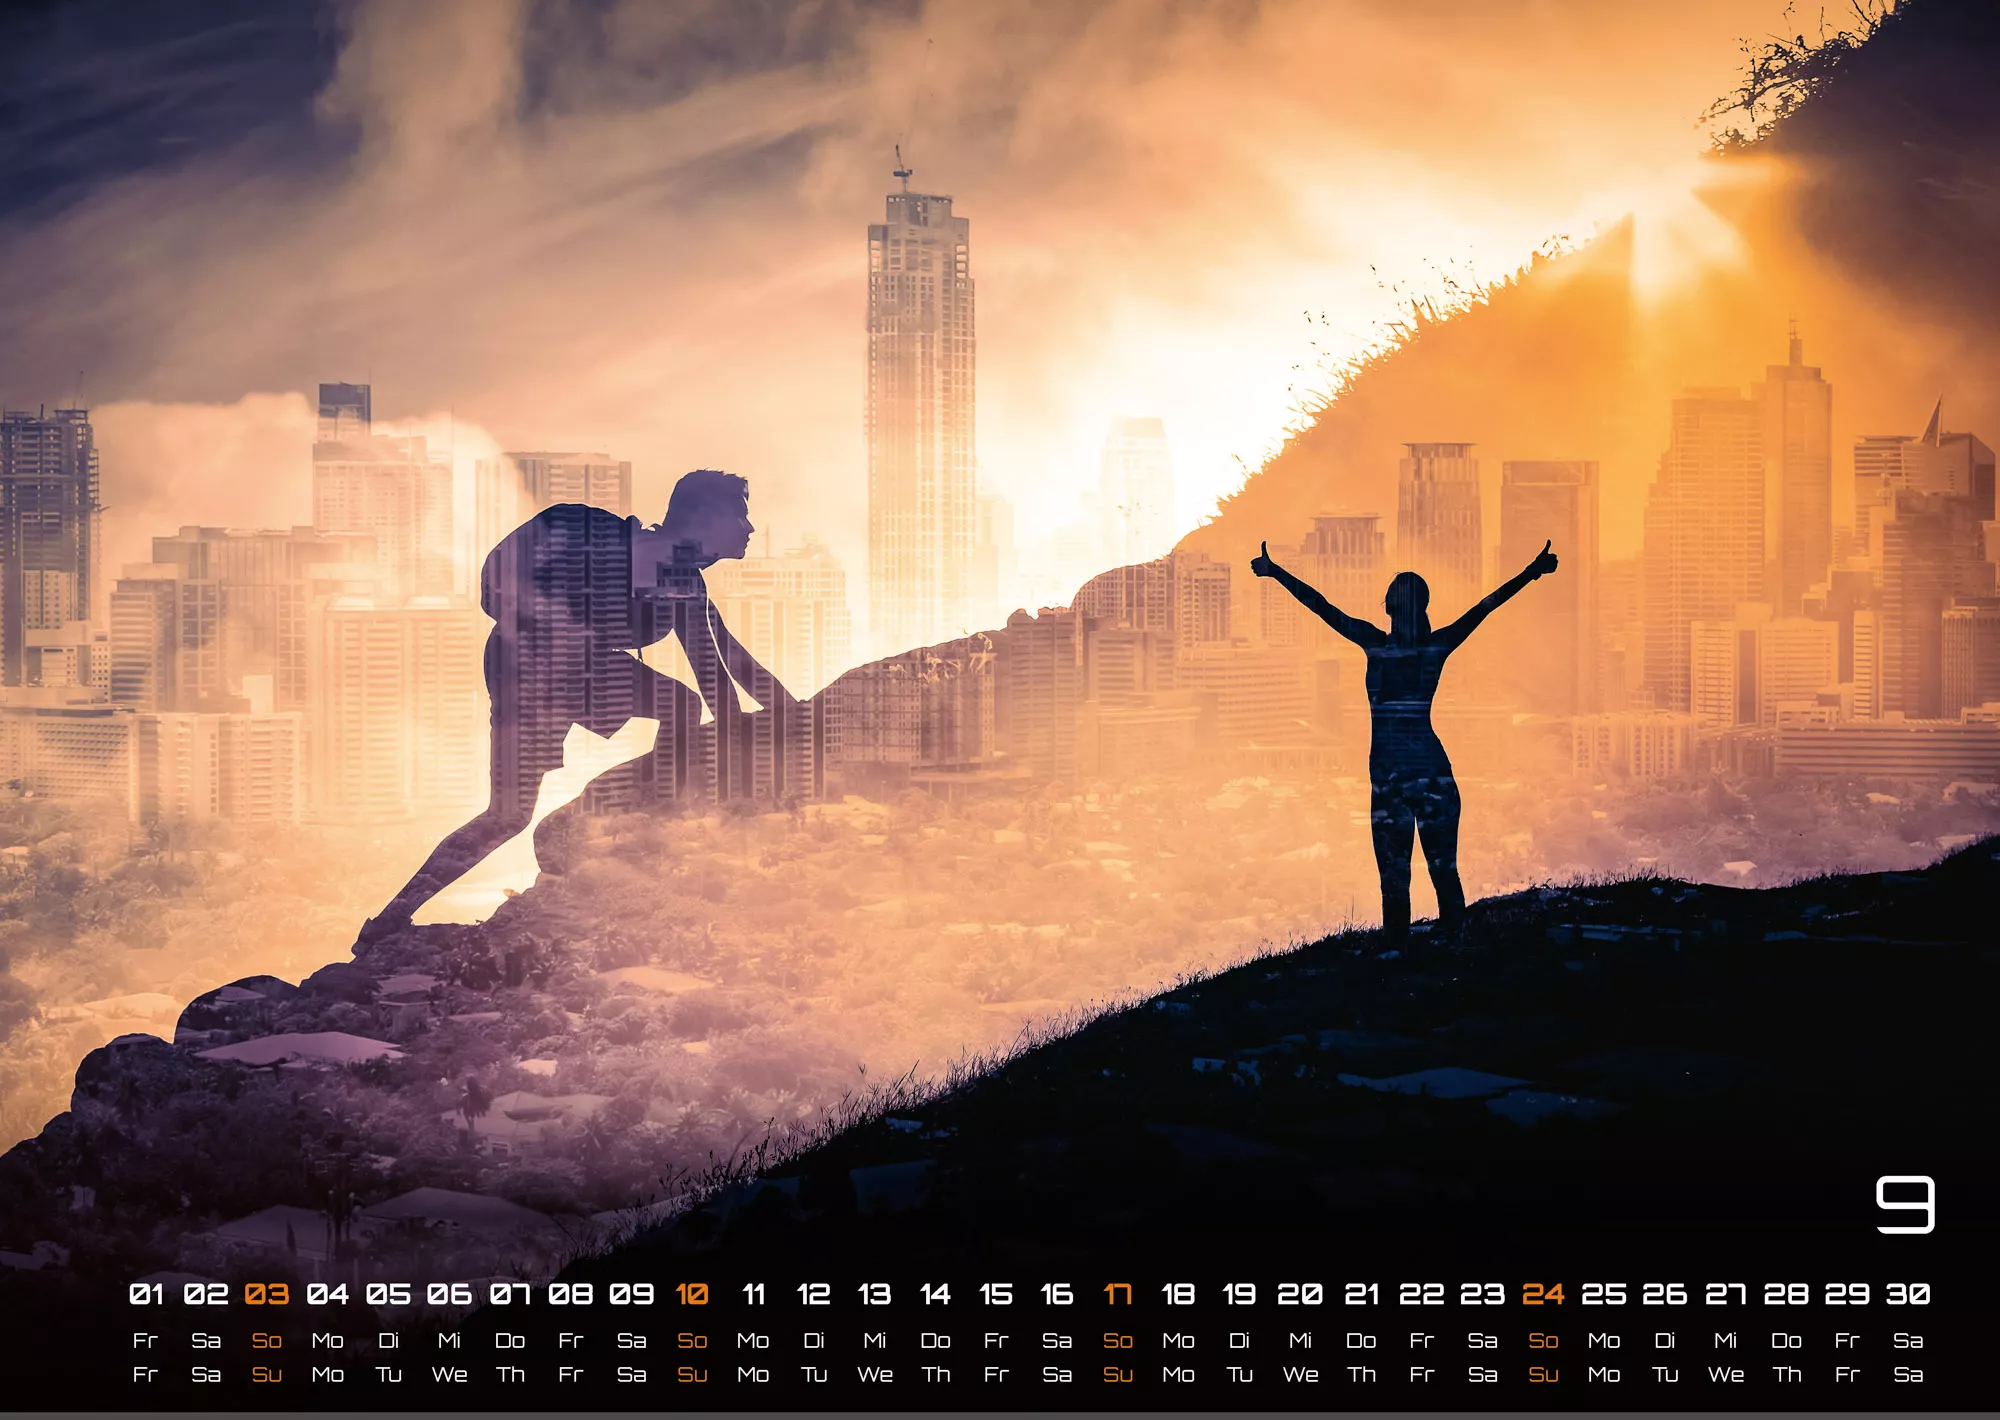 Motivation - your only limit is you - 2023 - Kalender